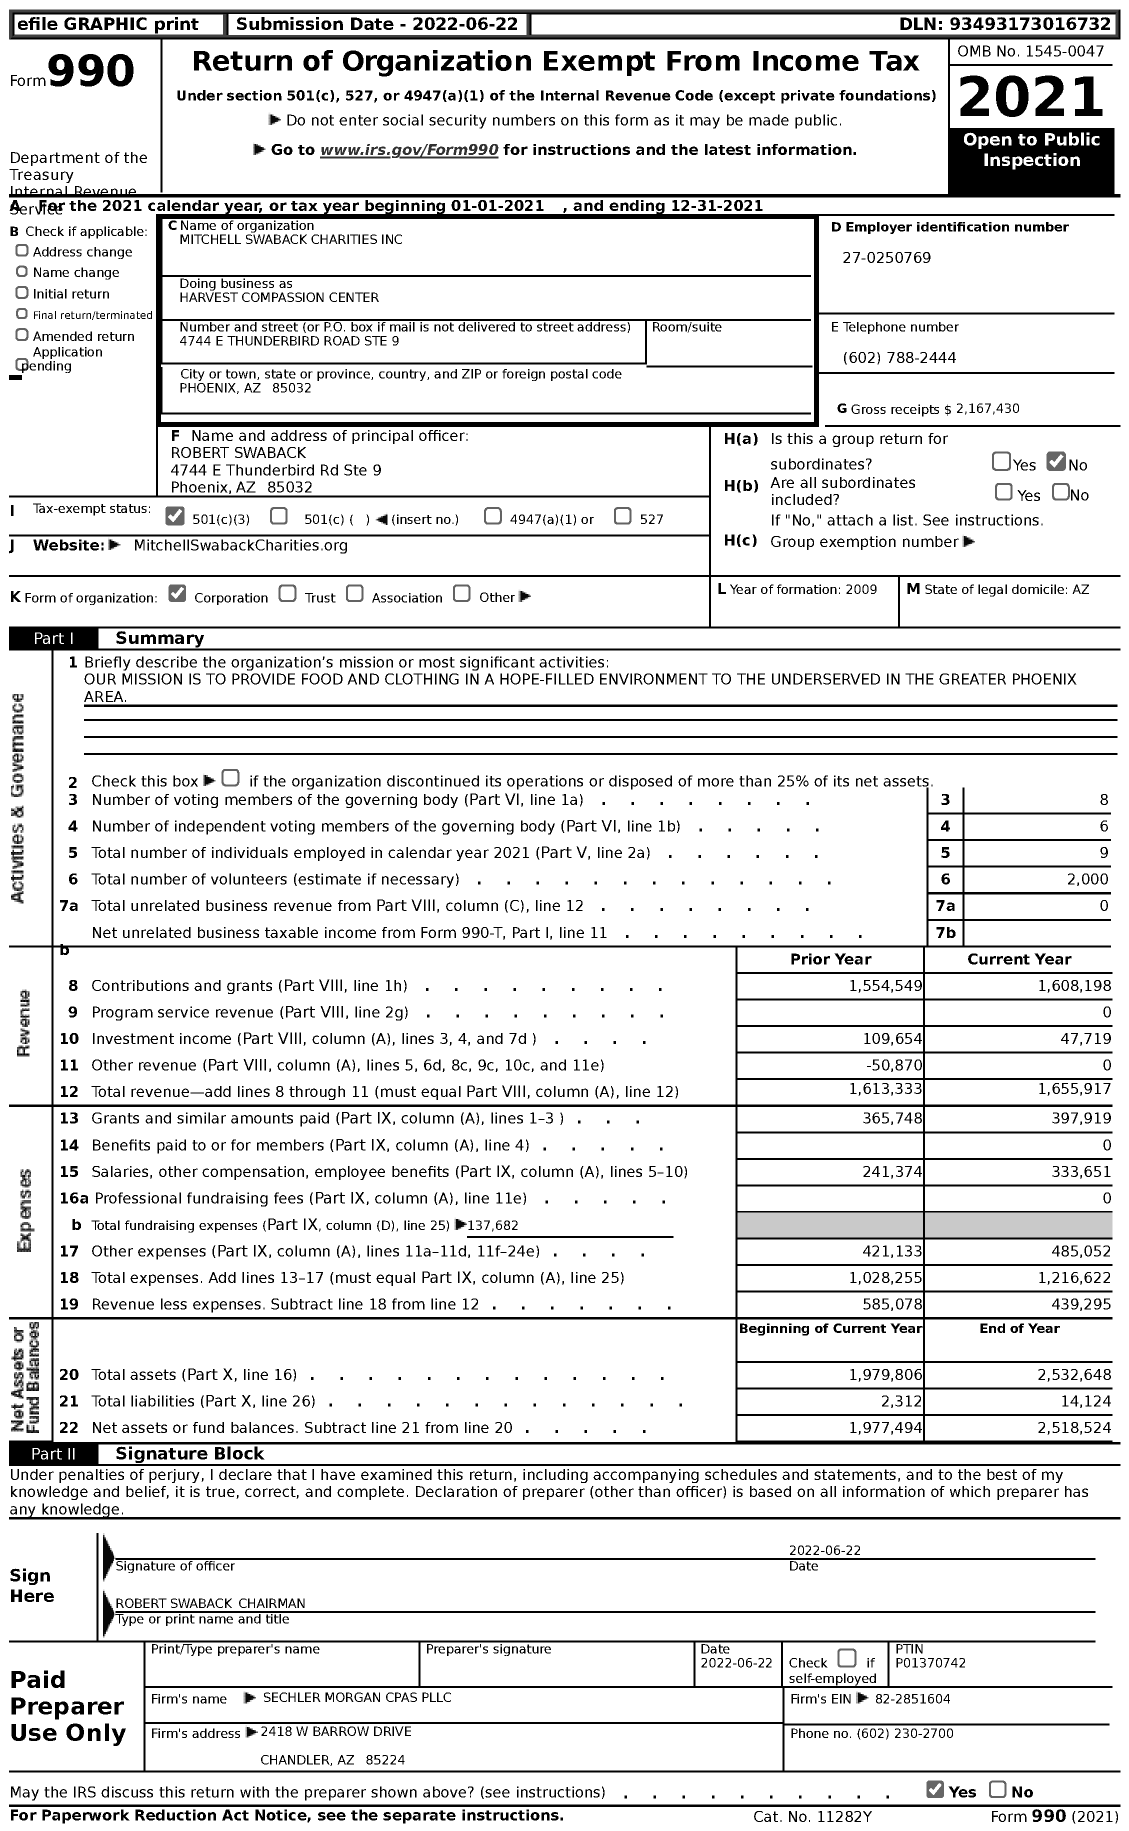 Image of first page of 2021 Form 990 for Harvest Compassion Center